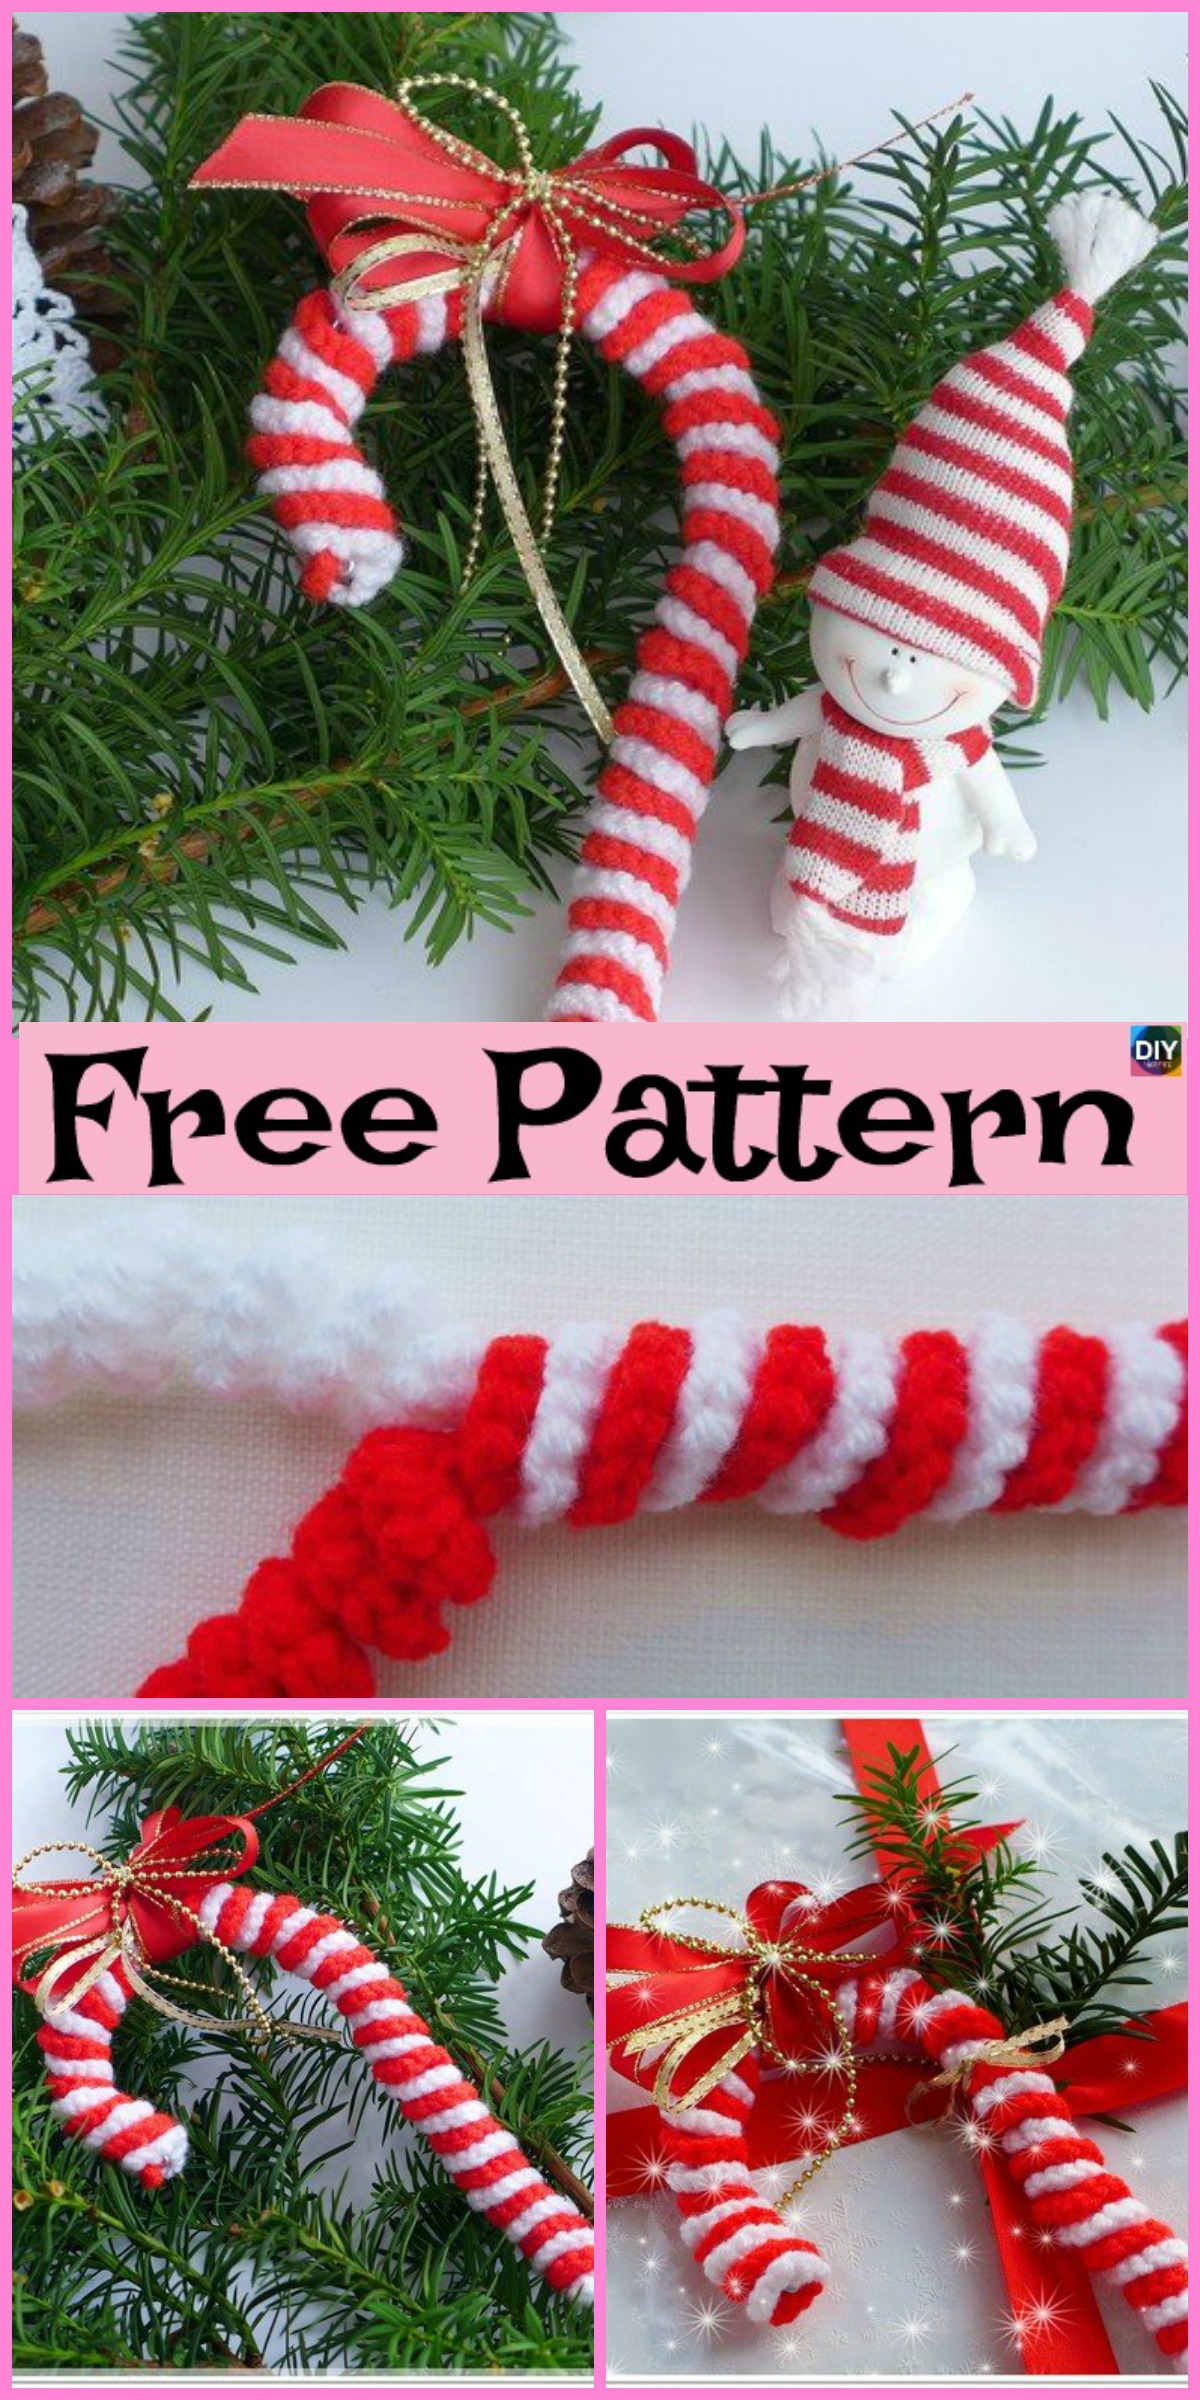 diy4ever-Easy Crochet Candy Canes - Free Pattern.